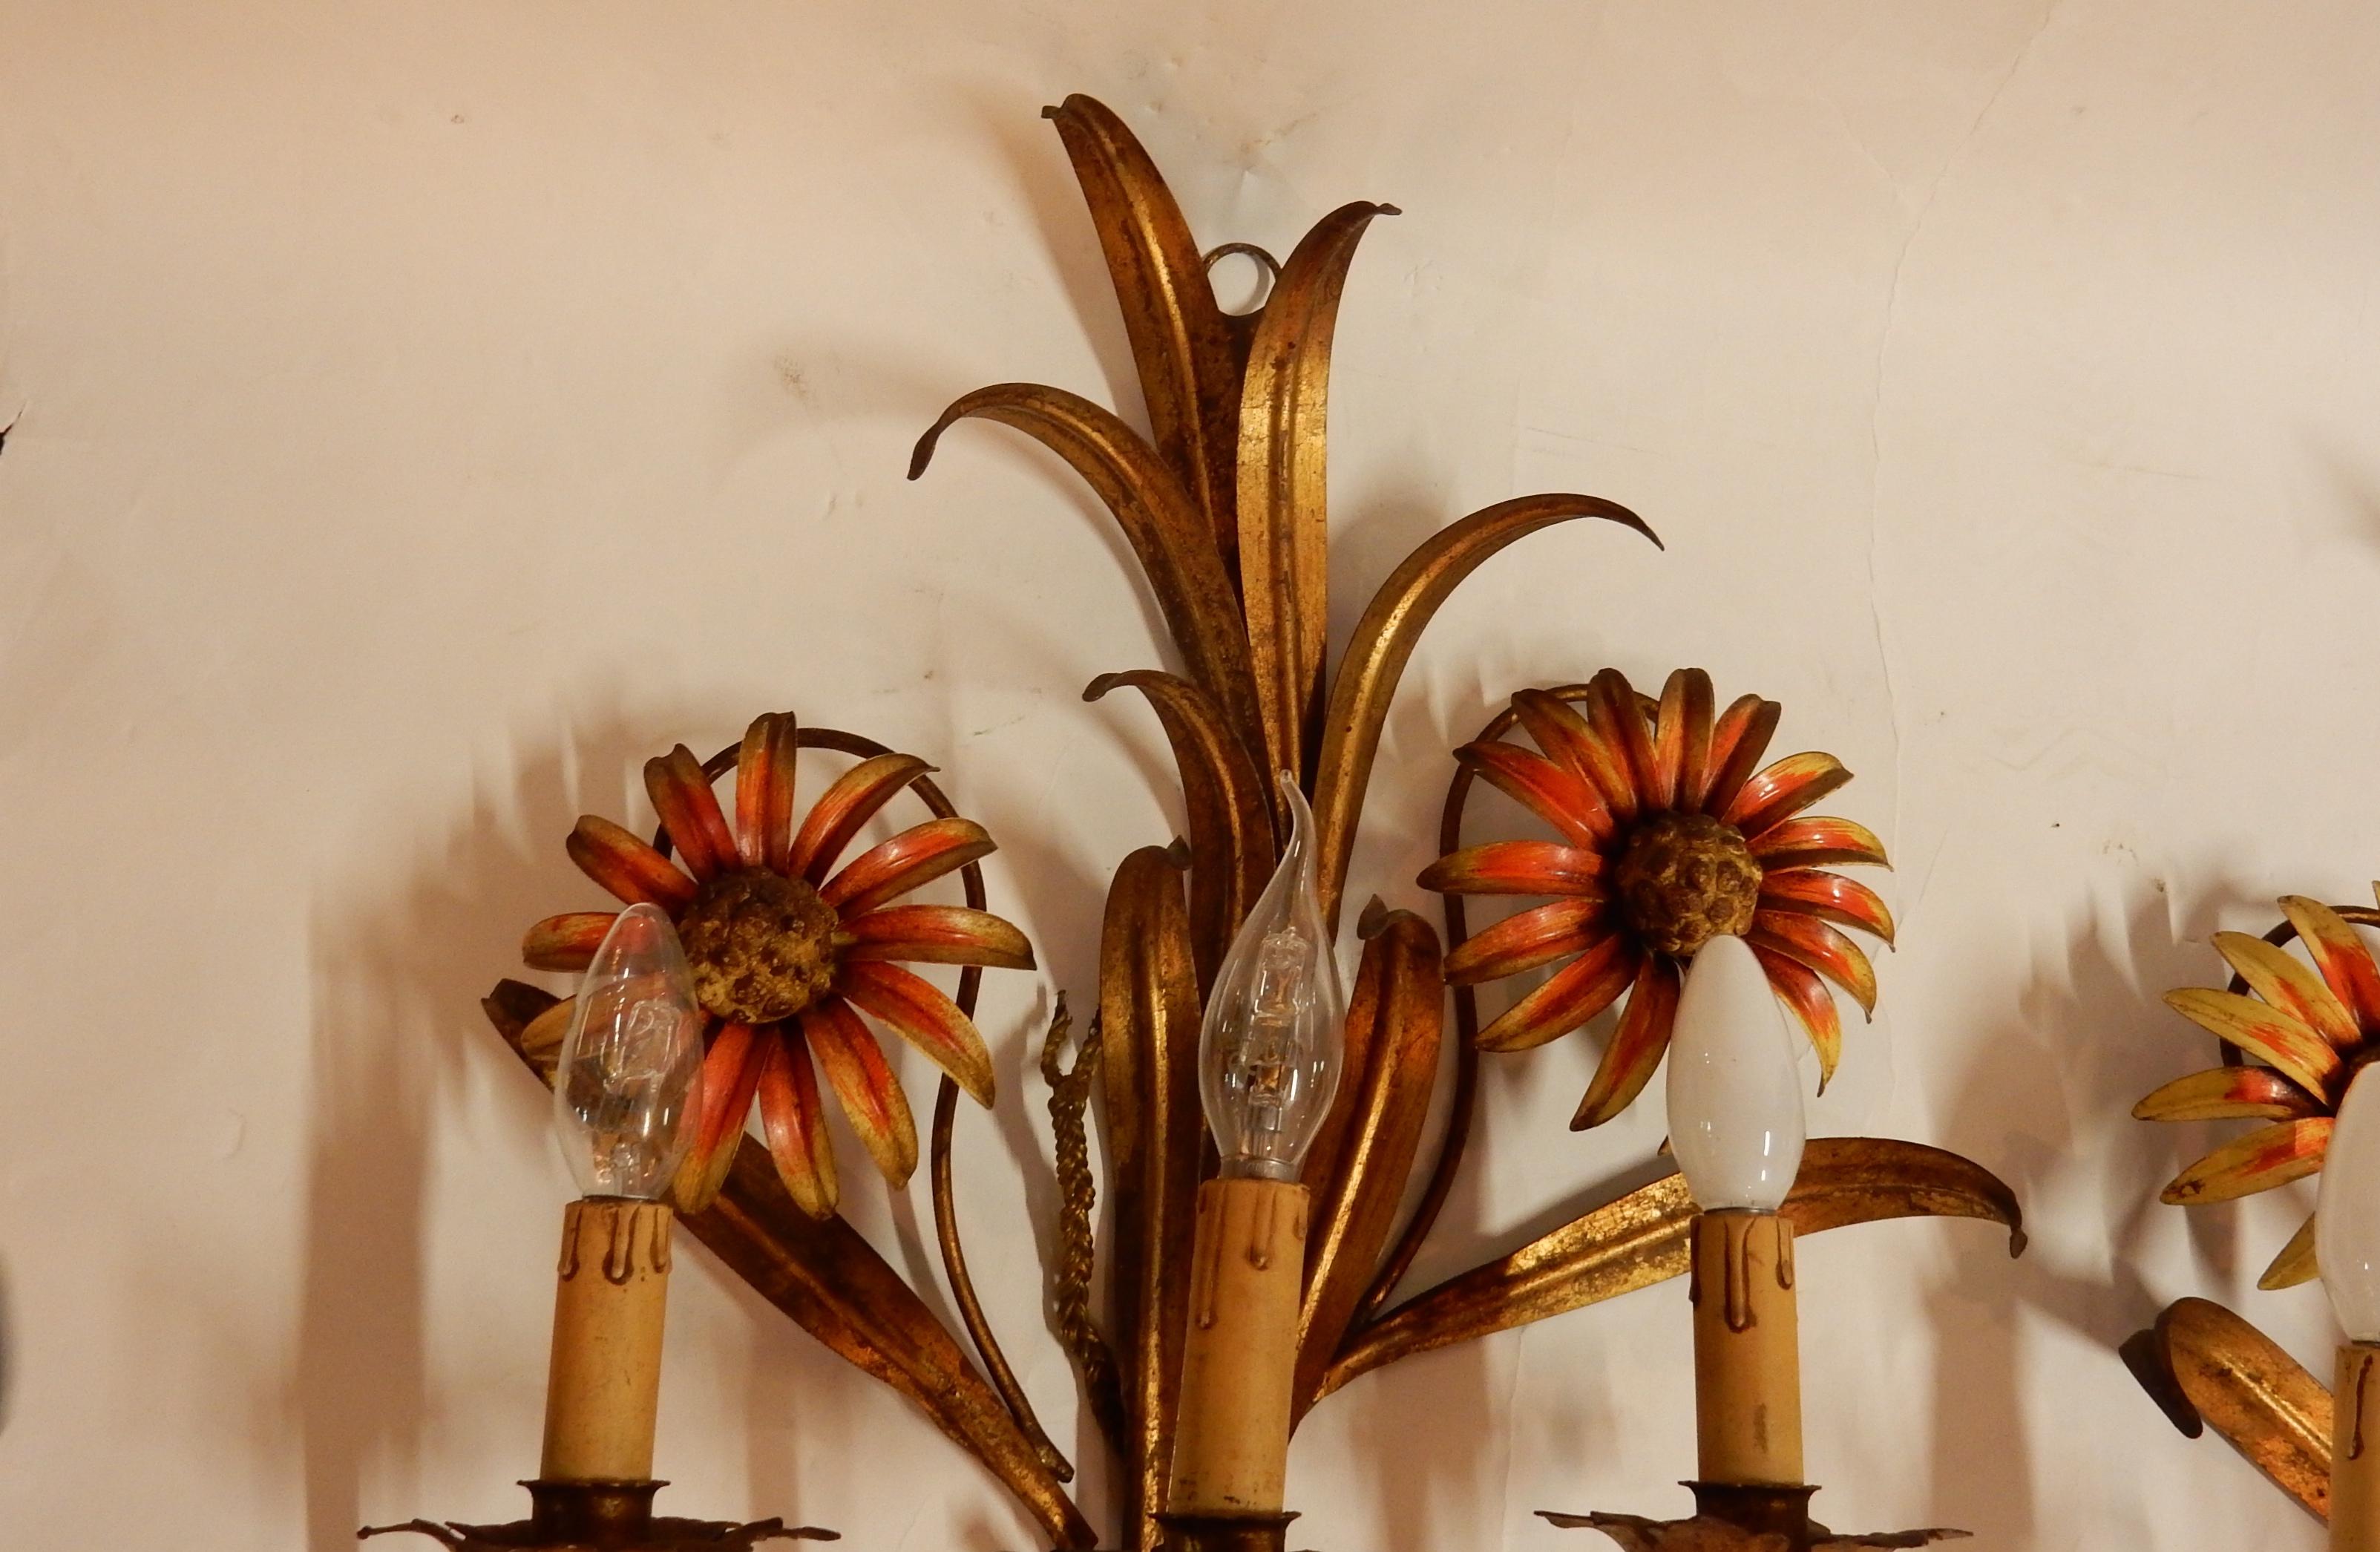 Brutalist 1970 Pair of Painted Metal Sconces with Sunflower Decor 3 Arms of Light For Sale